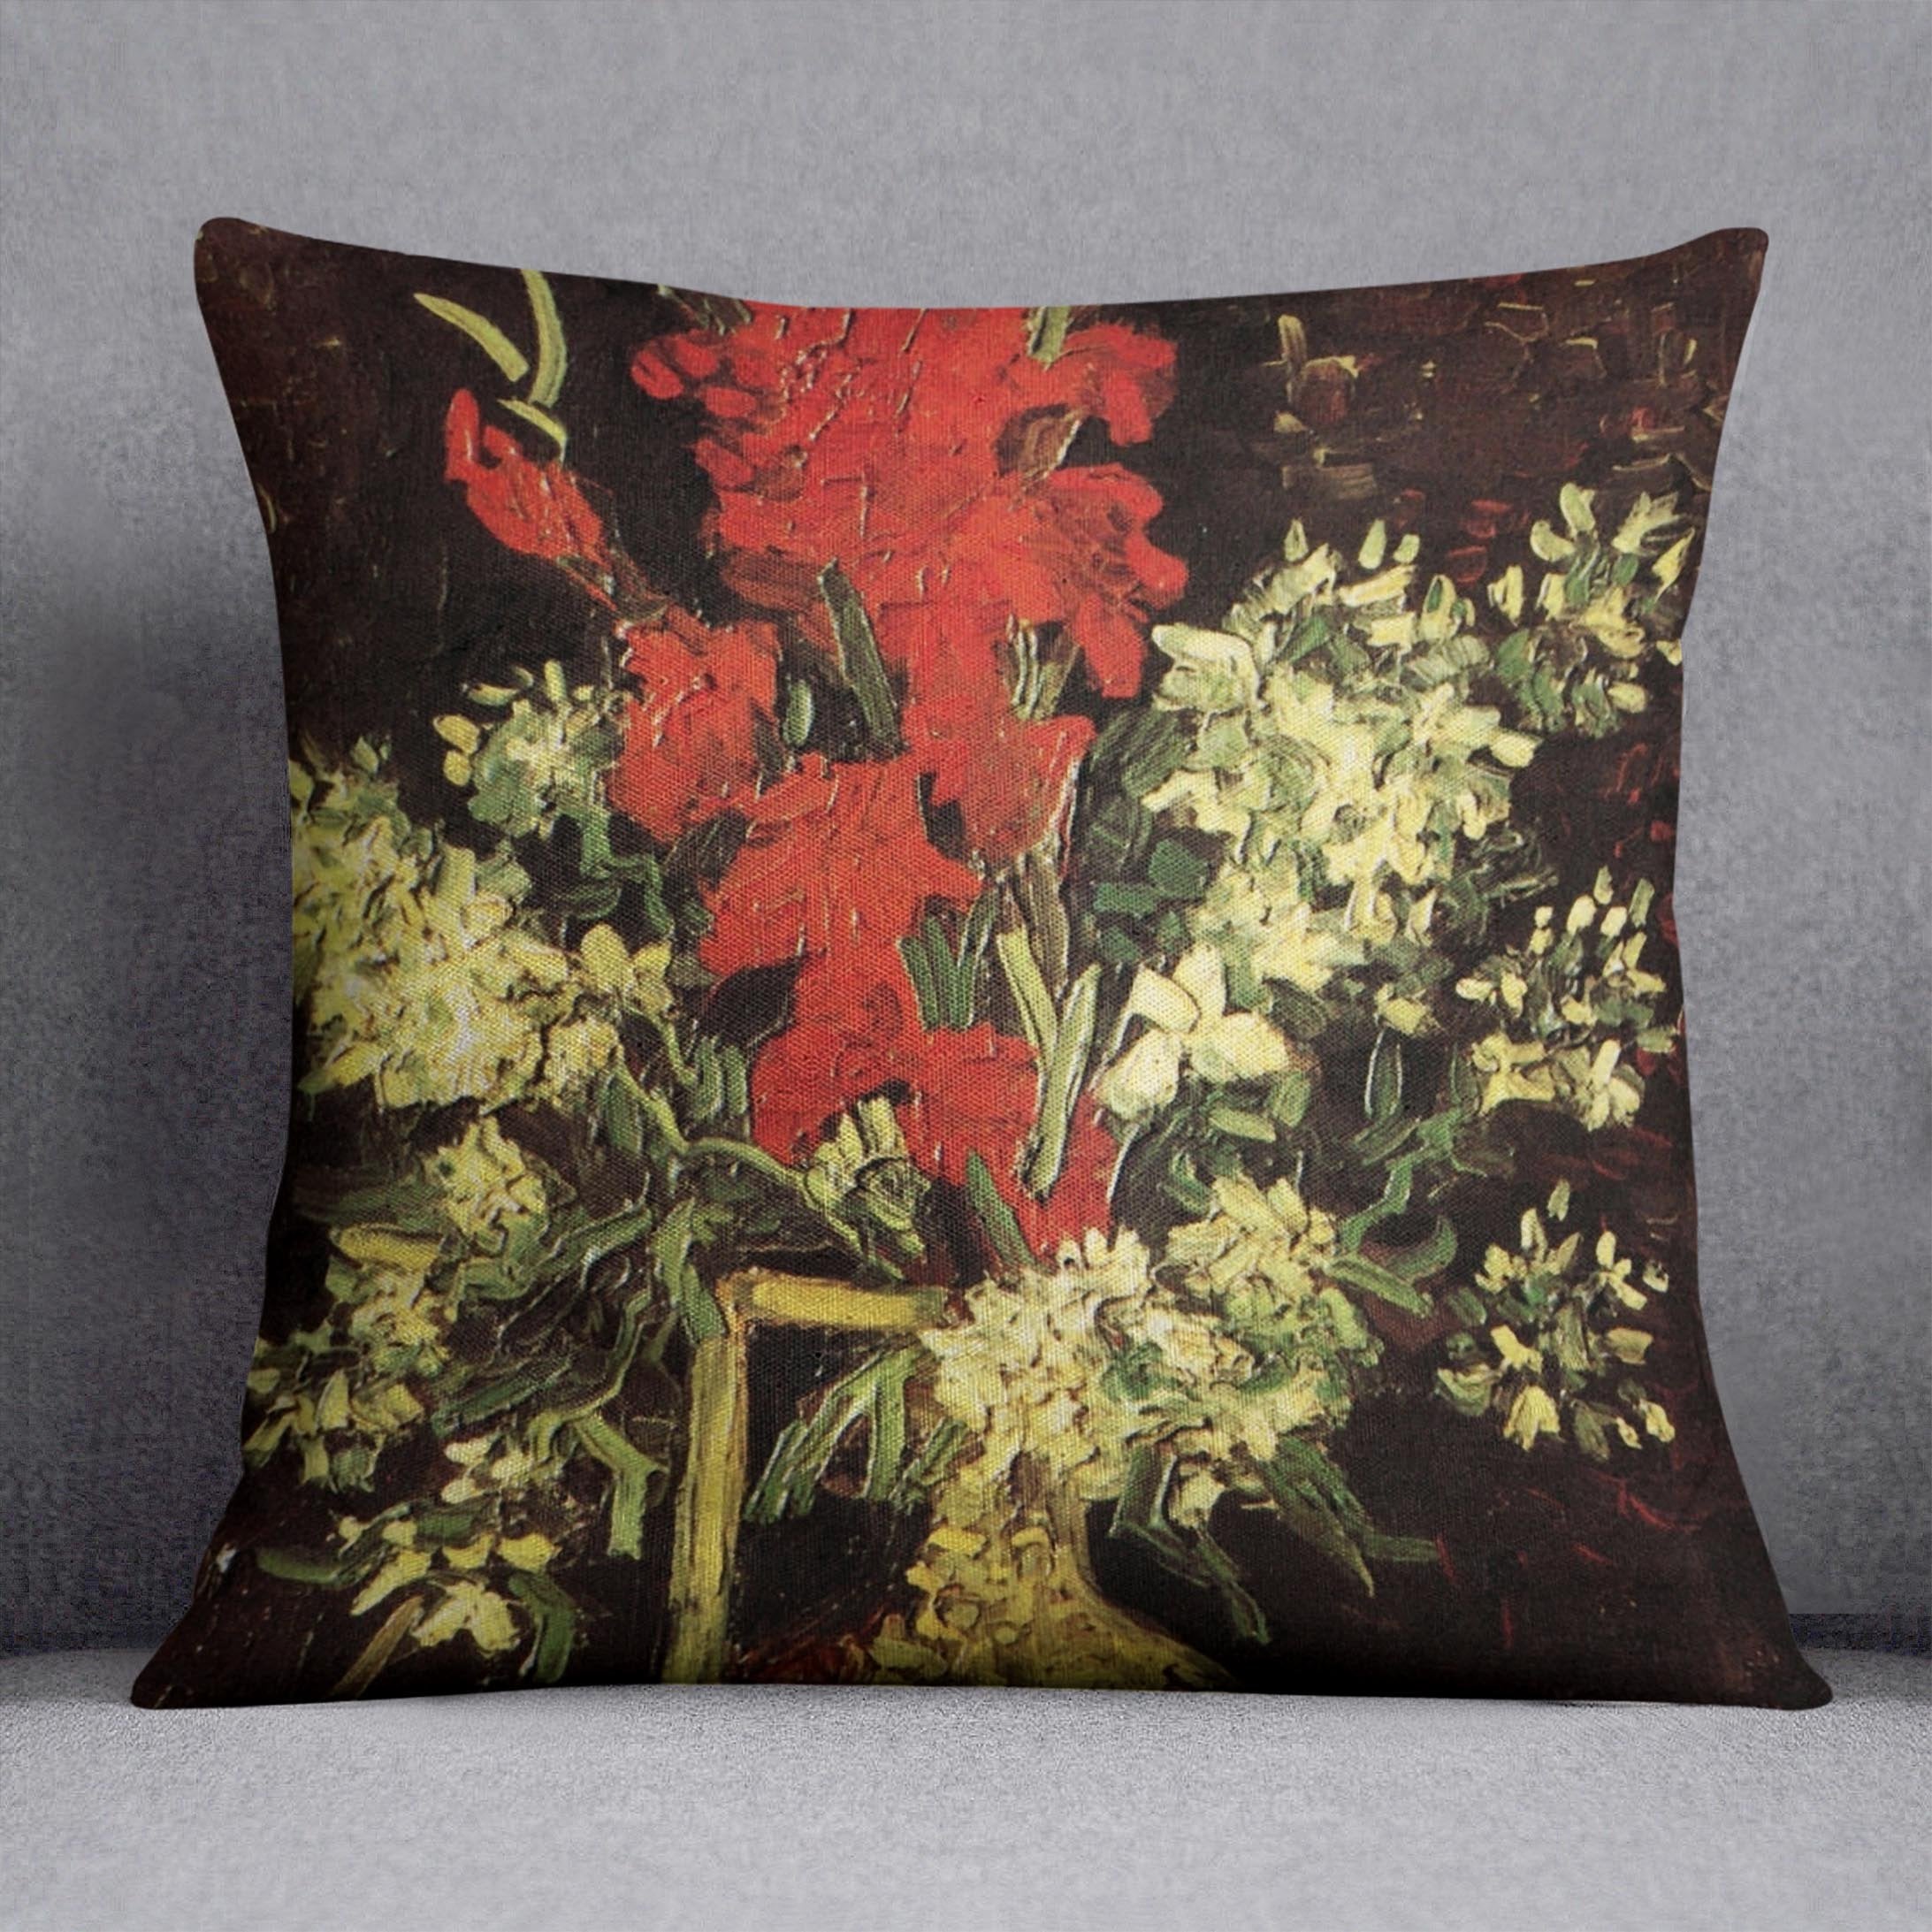 Vase with Gladioli and Carnations by Van Gogh Throw Pillow